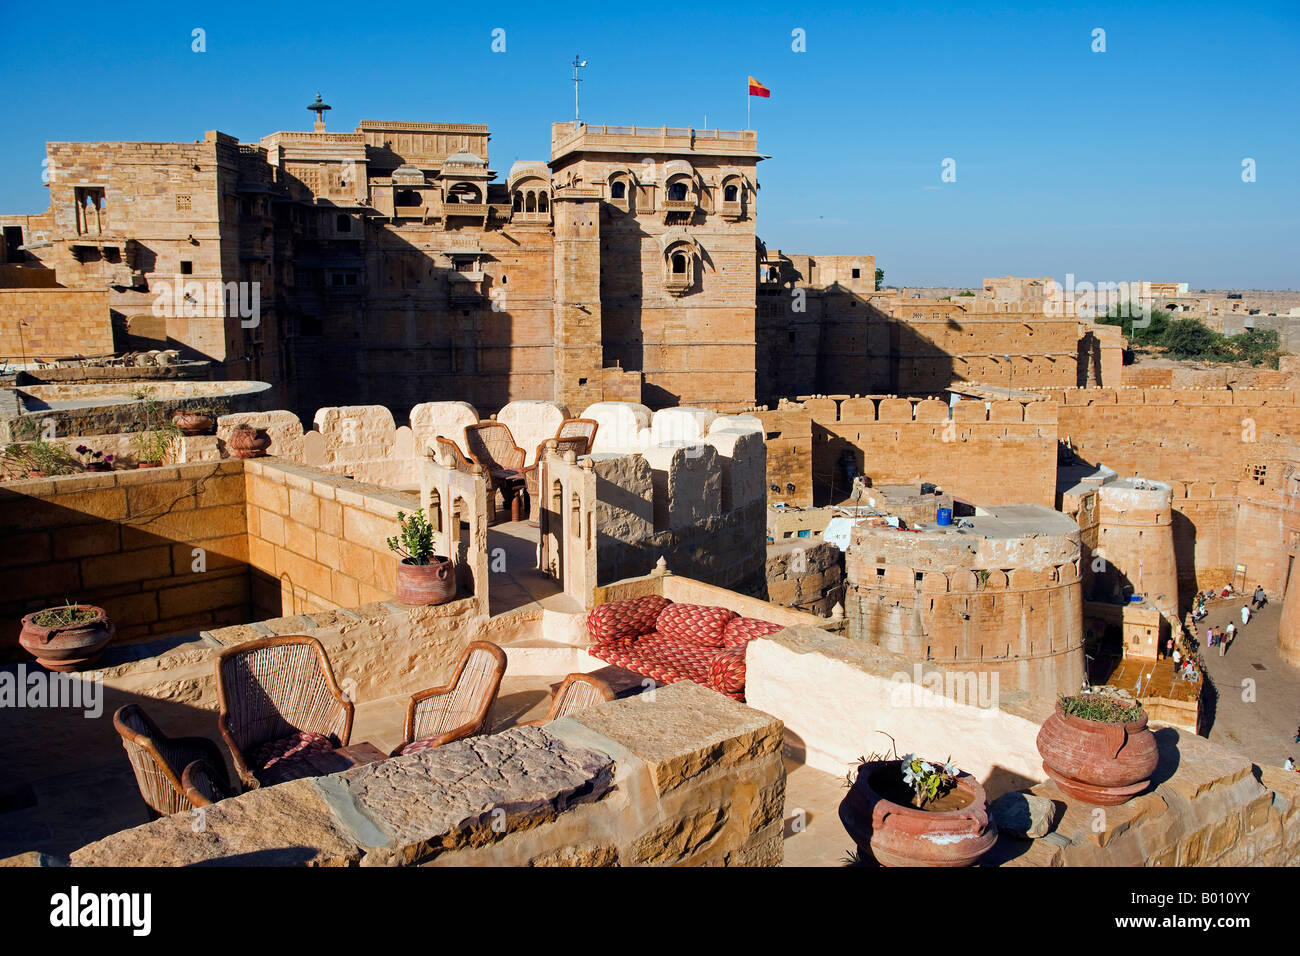 India, Rajasthan, Jaisalmer. Jaisalmer Fort - overlooking the lounge area of a haveli (old palaces now used for tourists). Stock Photo